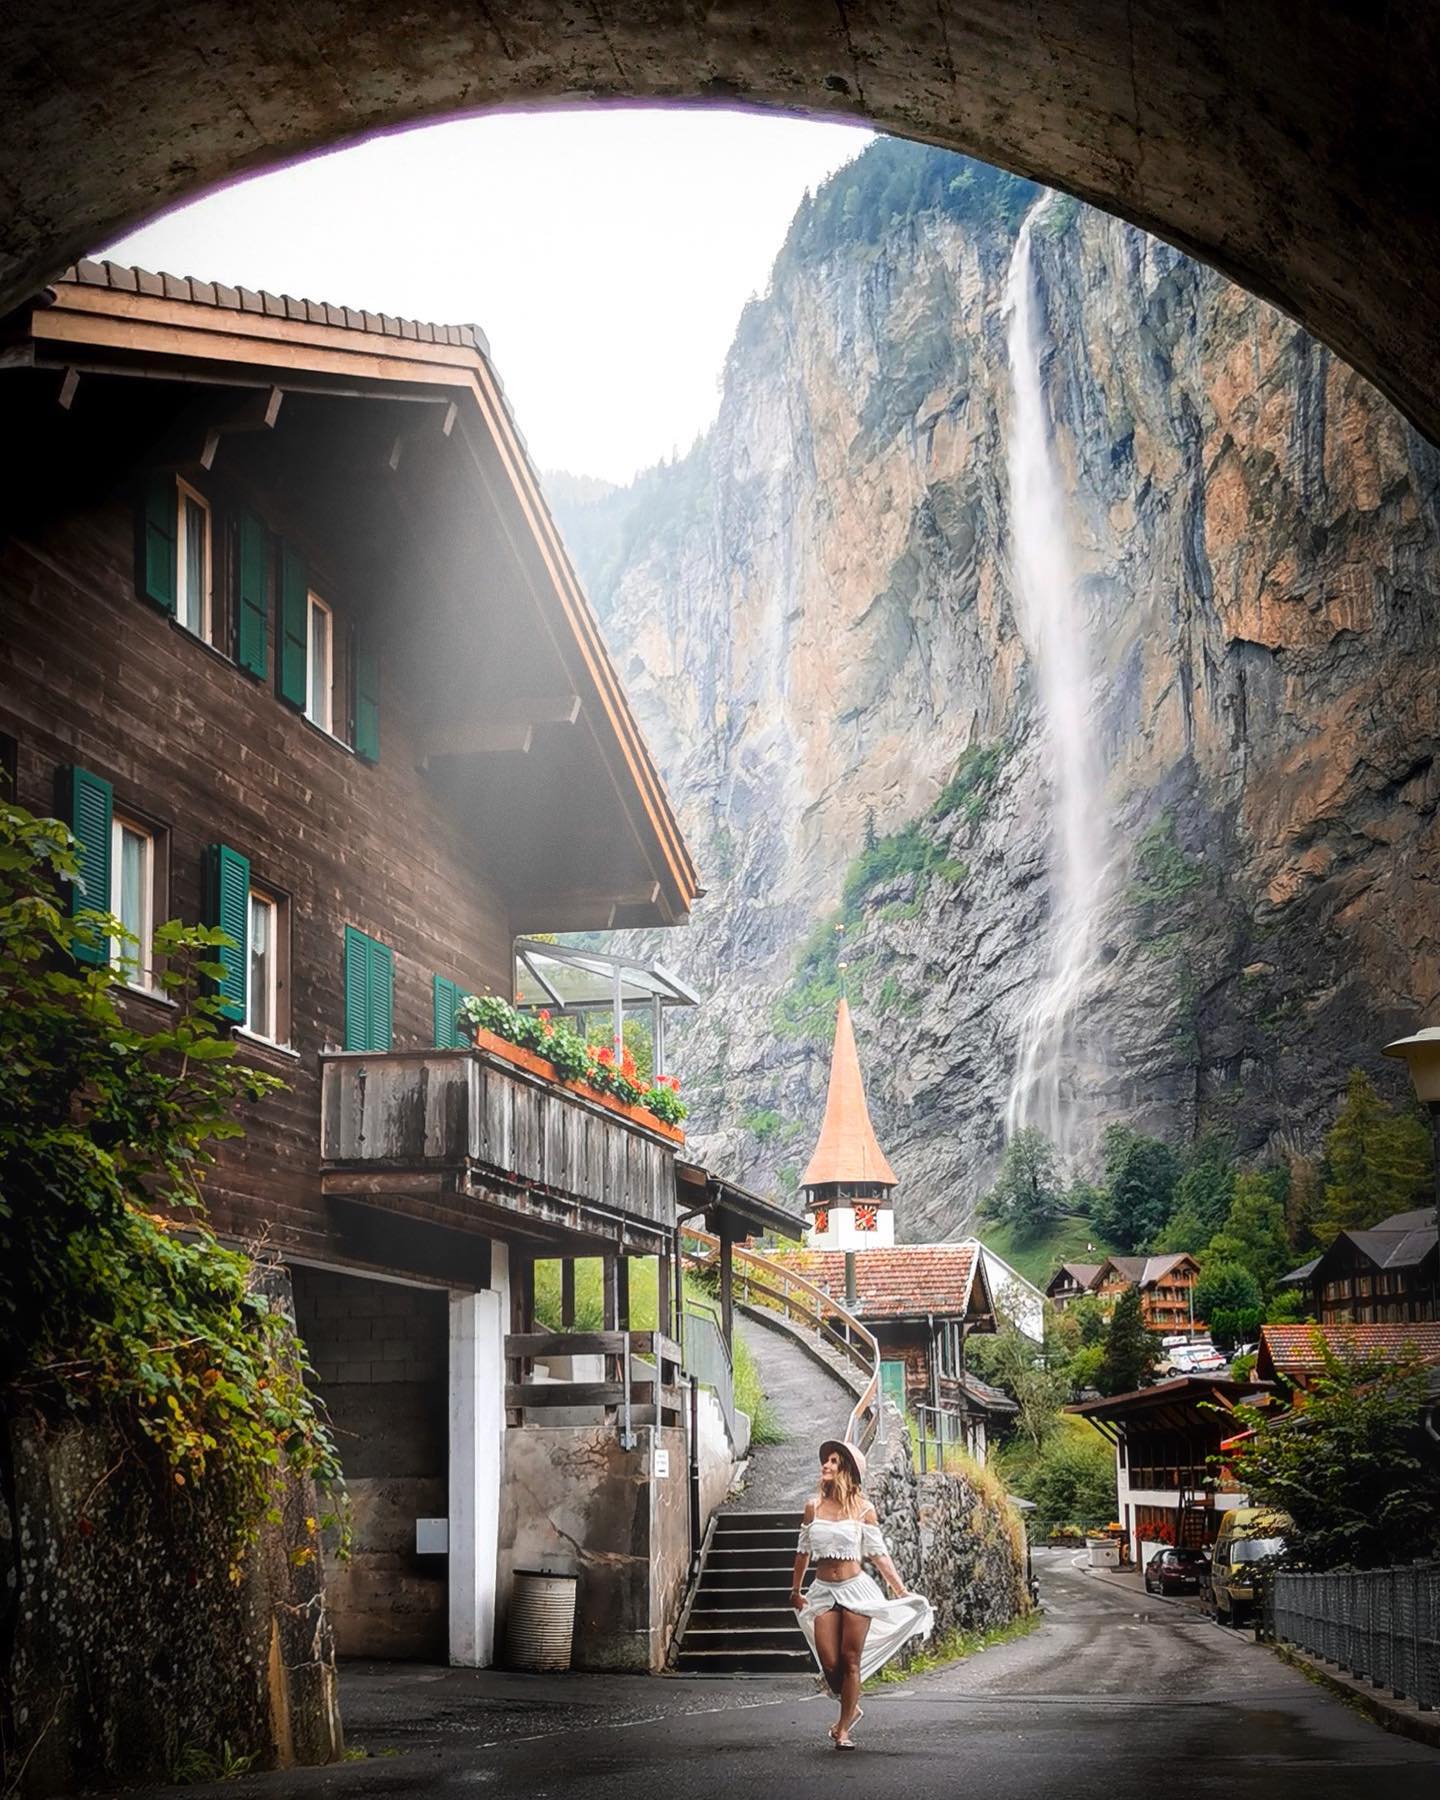 Woke up in a fairytale village surrounded by 72 waterfalls. The mix of sun and rain was incredibly beautiful 😍 and even how the waterfalls changed their colors during the heavy rain - first time for me to observe this 🤩
.
.
📸by @luca.schranz 
.
.
#lauterbrunnen #berneroberland #schweiz #schweiz🇨🇭 #Switzerland #switzerland🇨🇭 #fairytale #travel #travelgirl #wanderwomen #iamtb #waterfall #staubbachfall